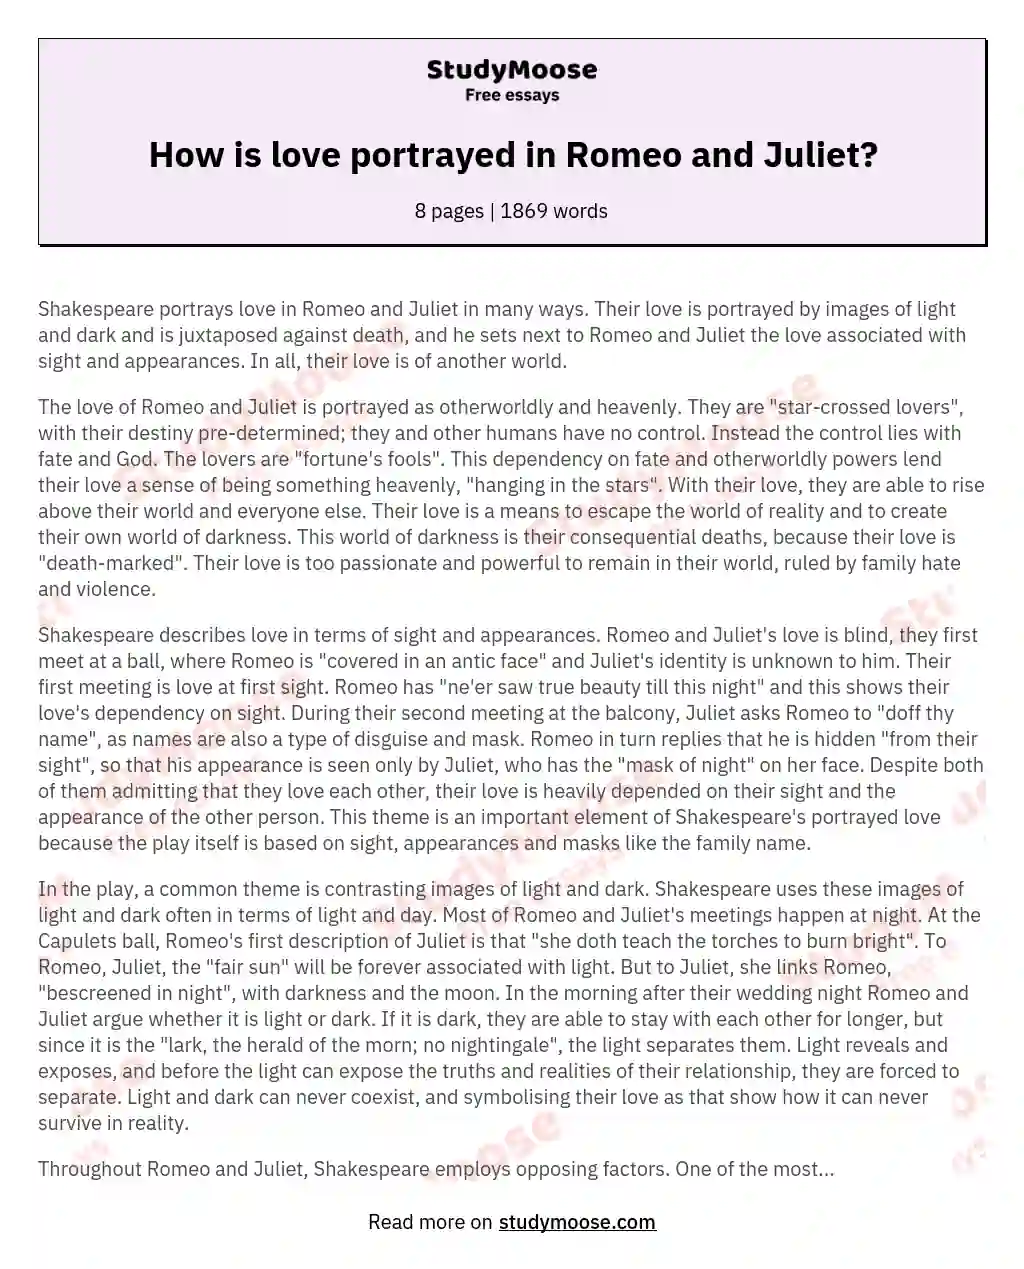 How is love portrayed in Romeo and Juliet? essay